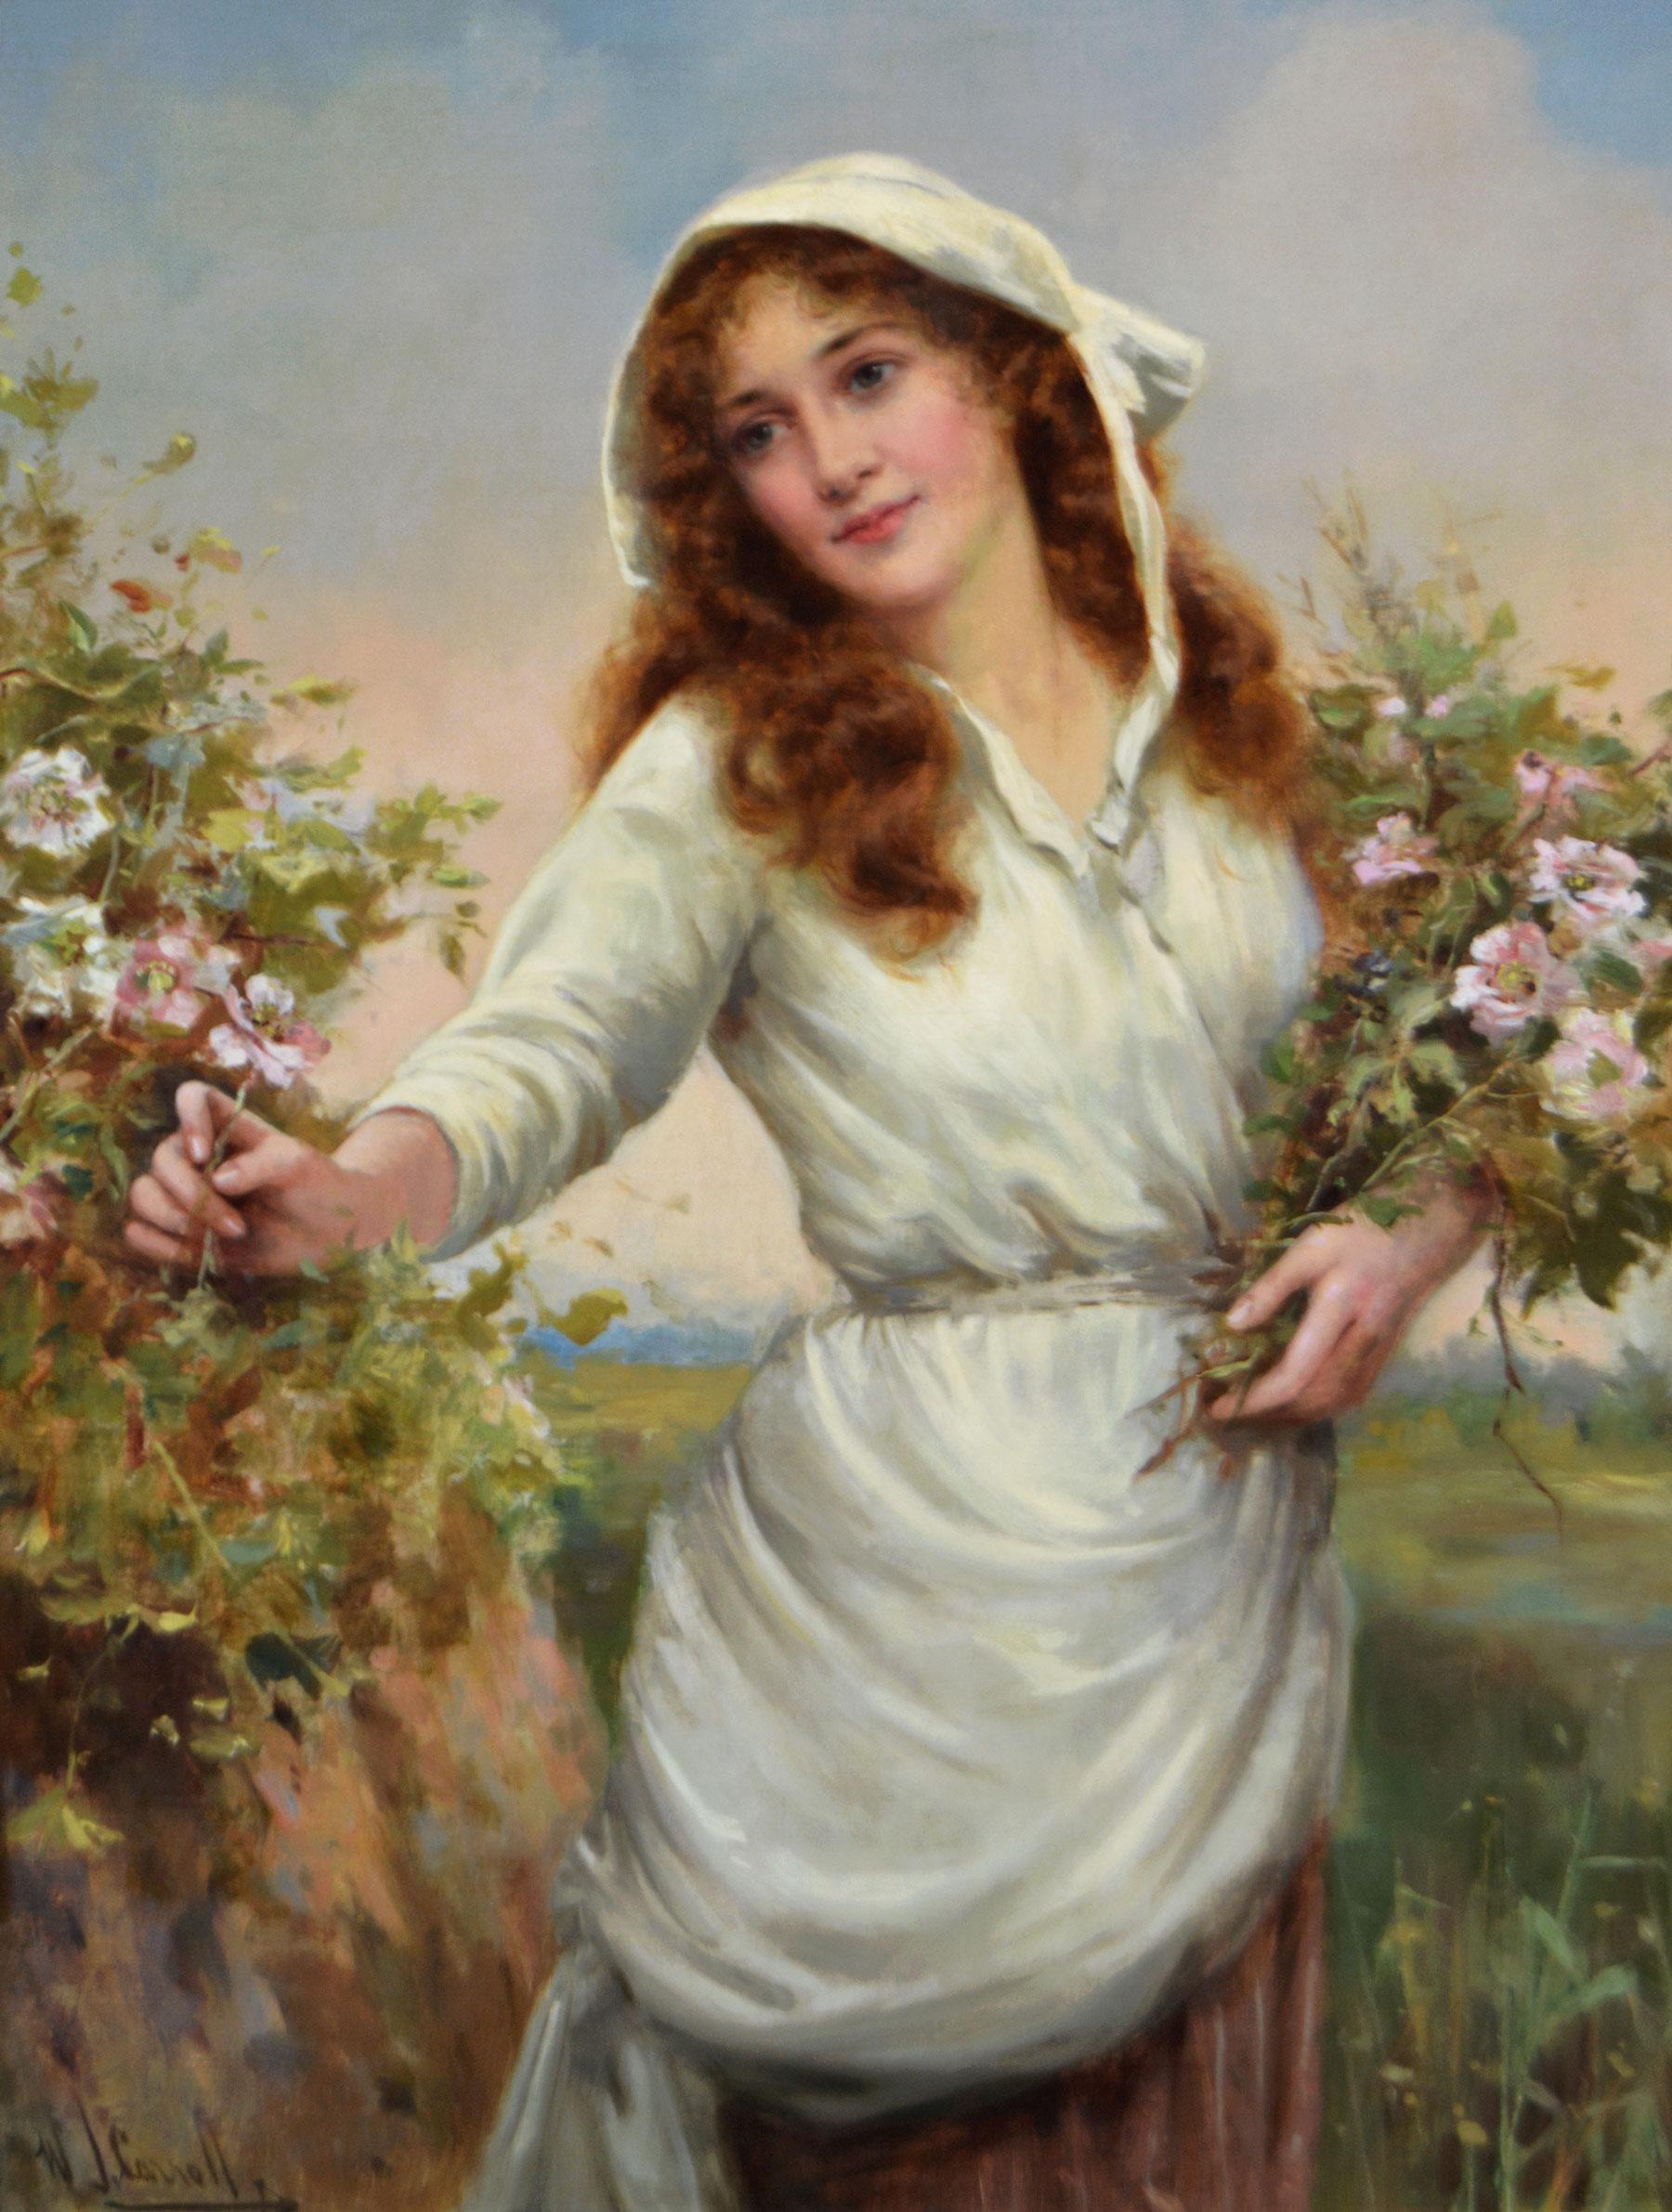 19th Century genre oil painting of a young woman picking flowers  - Painting by William Joseph Carroll